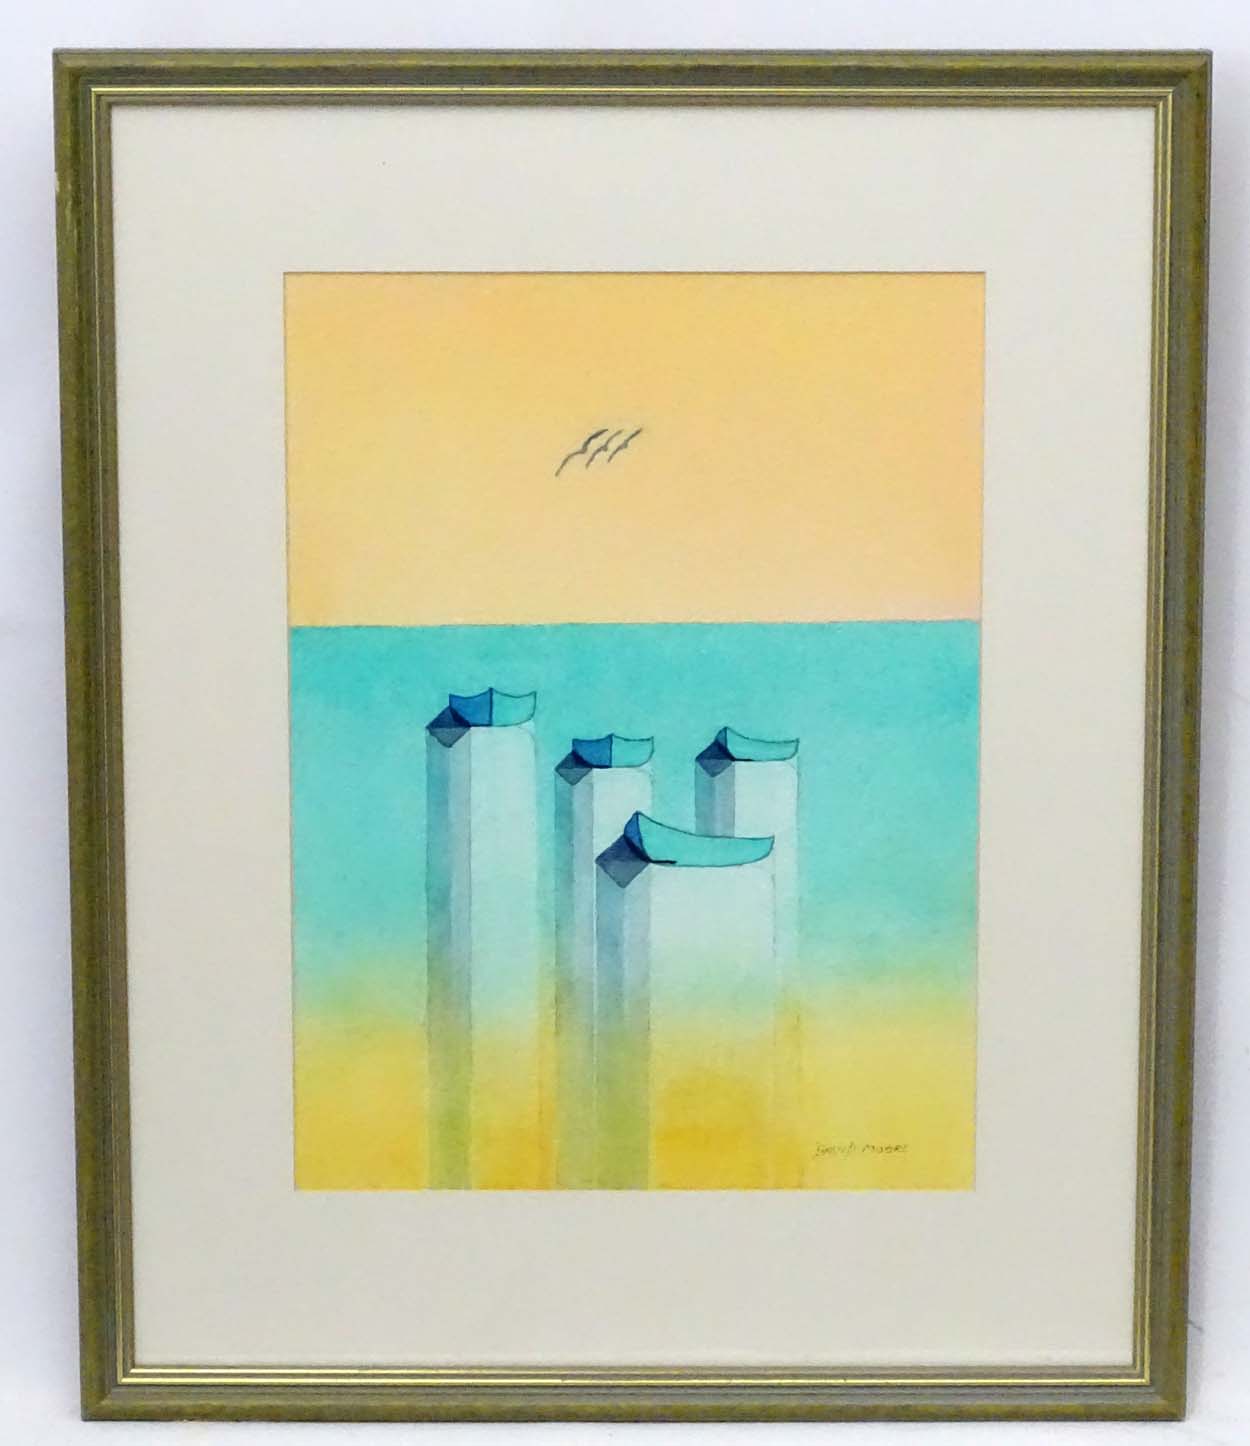 David Moore 2006, Watercolour, ' Birds and Boats ', Signed lower right and labelled verso.